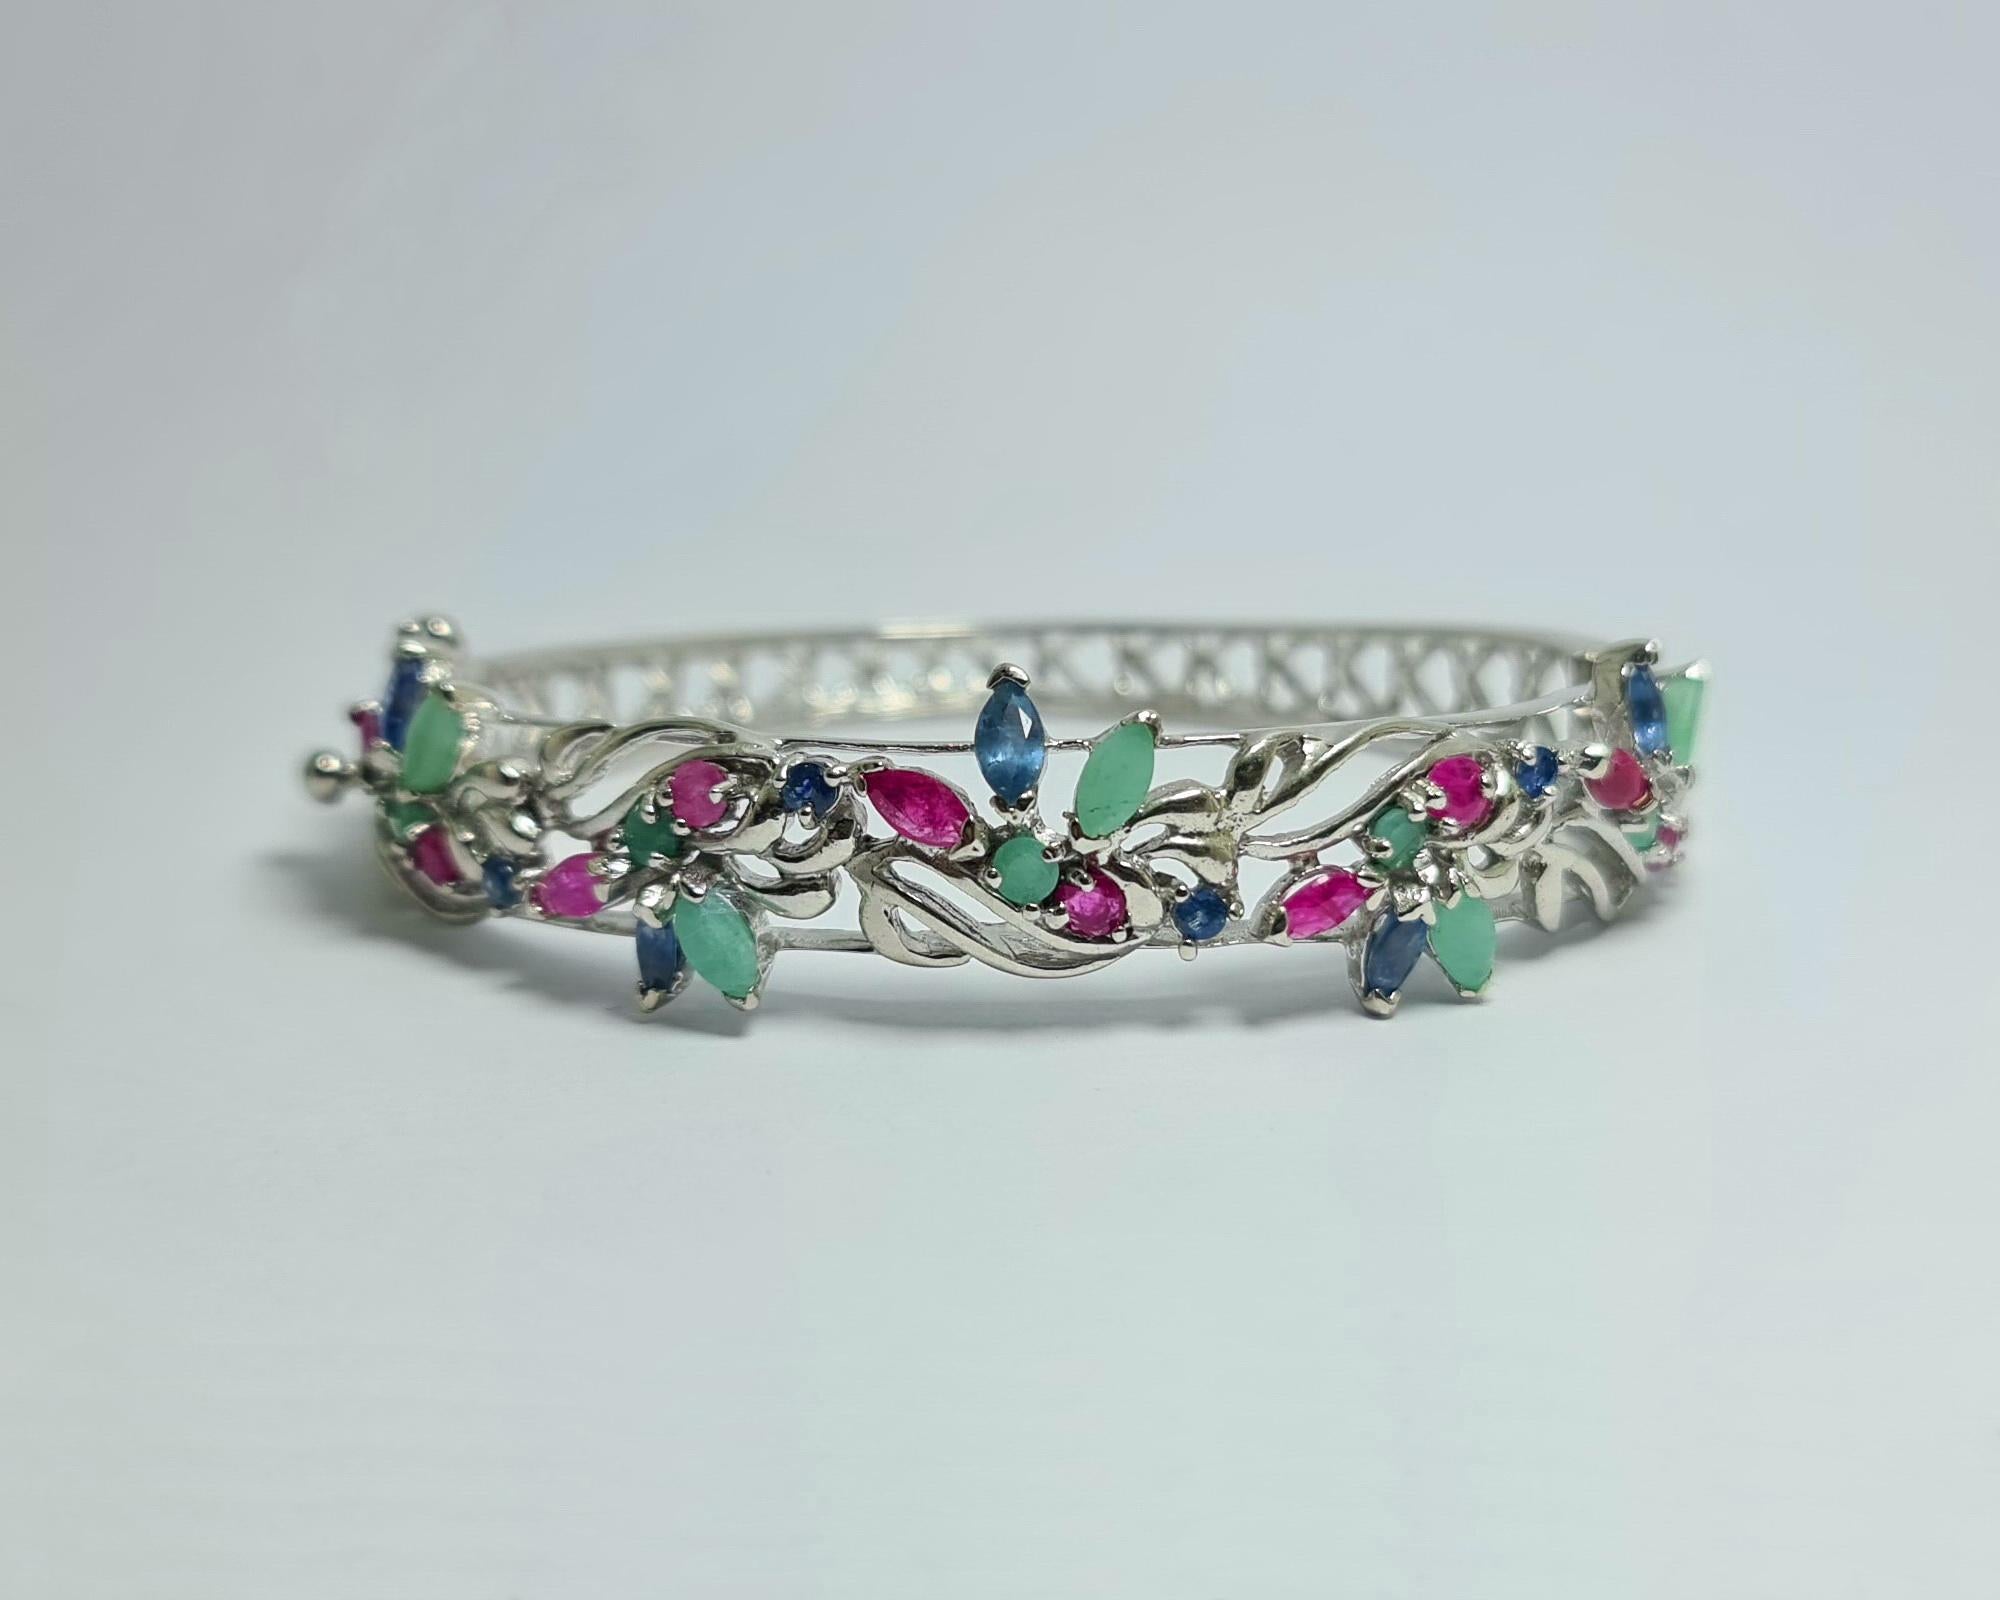 Natural Untreated Afghan Emerald and Thai Rubies and Sapphires  Marquis Oval and Round Cuts Set in Pure .925 Sterling Silver with Rhodium Plating Tutti Frutti Bangle Cuff Bracelet 

Total carats: 15 carats
Weigh of the bracelet 28 grams